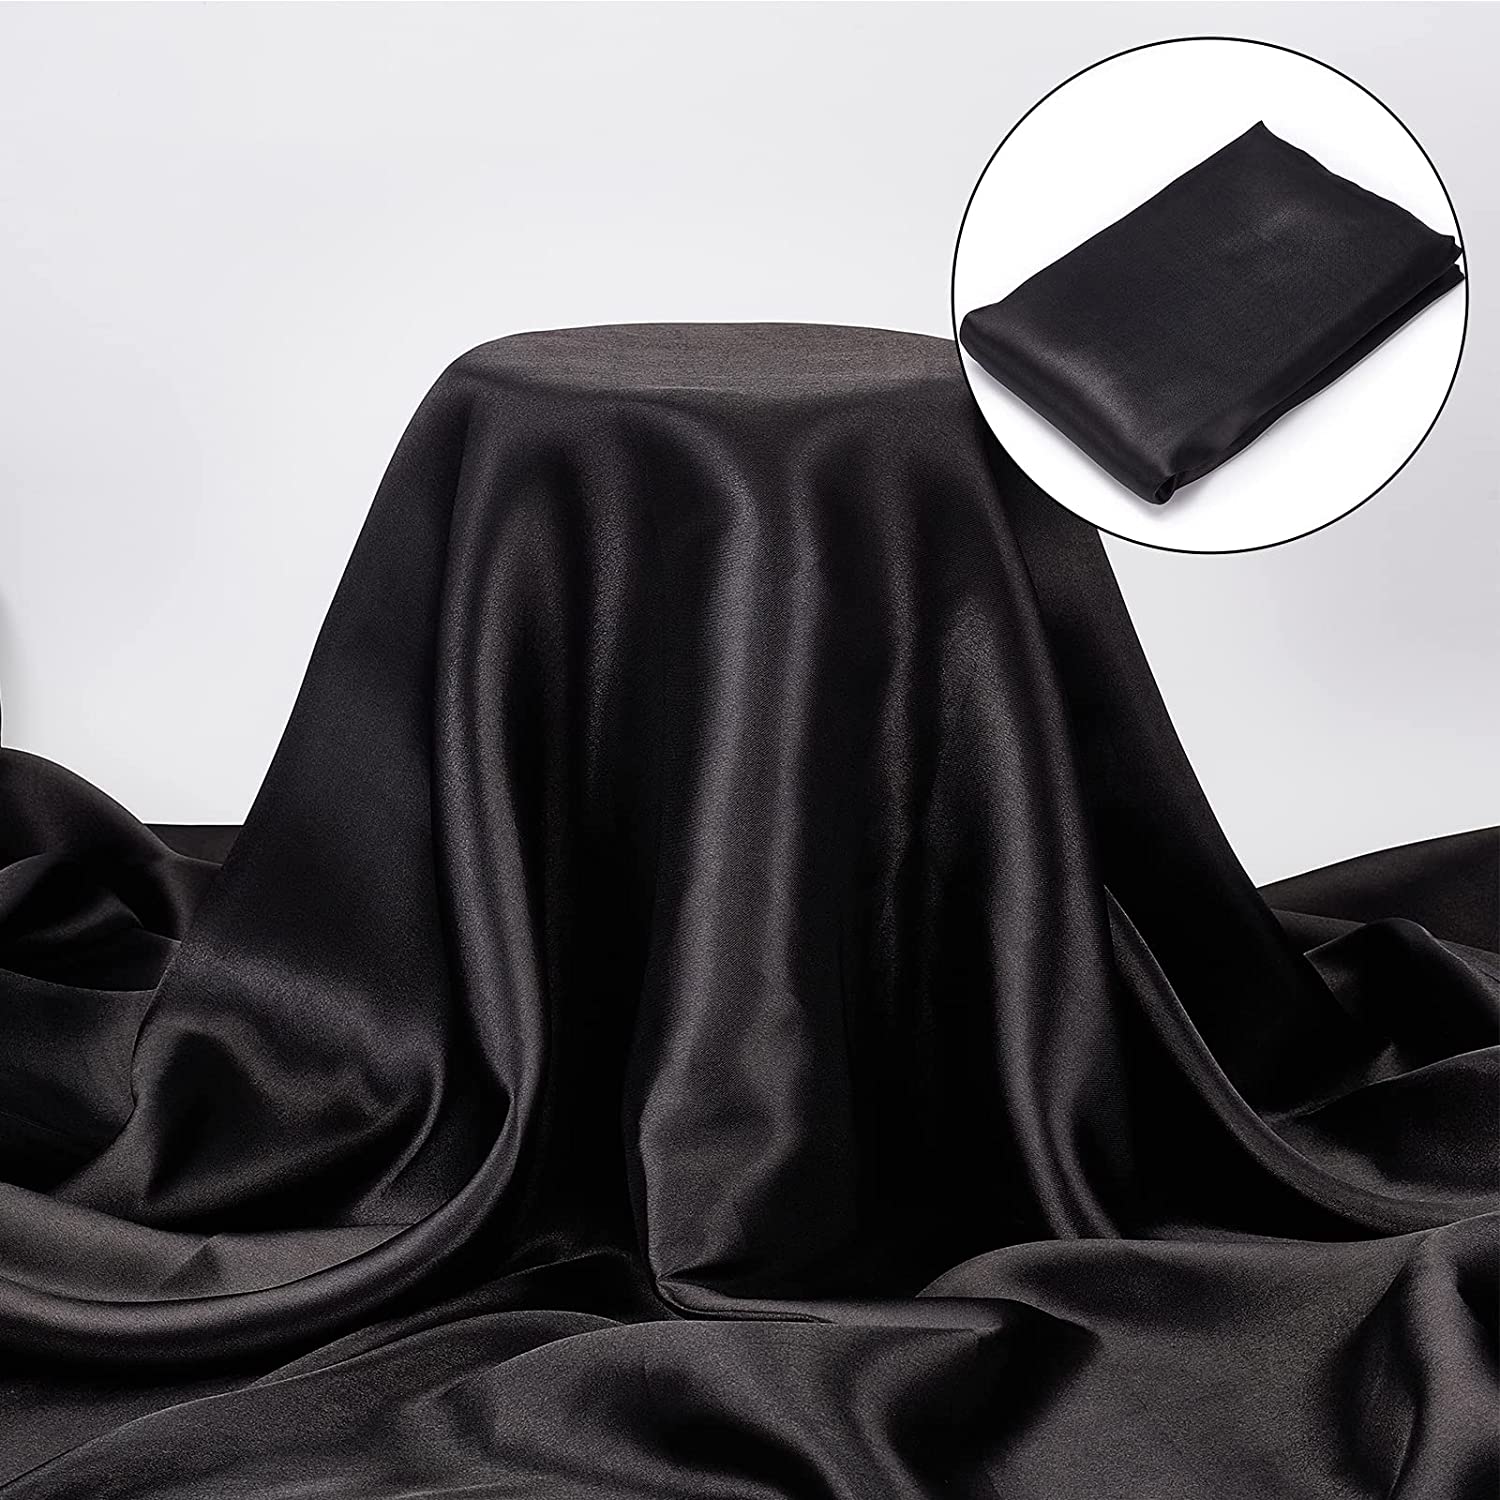 5yards Silky Shiny Satin, 60inch Wide Black Satin Fabric, Poly Silk Silky Satin Fabric for Arts and Crafts, DIY, Sewing Decoration